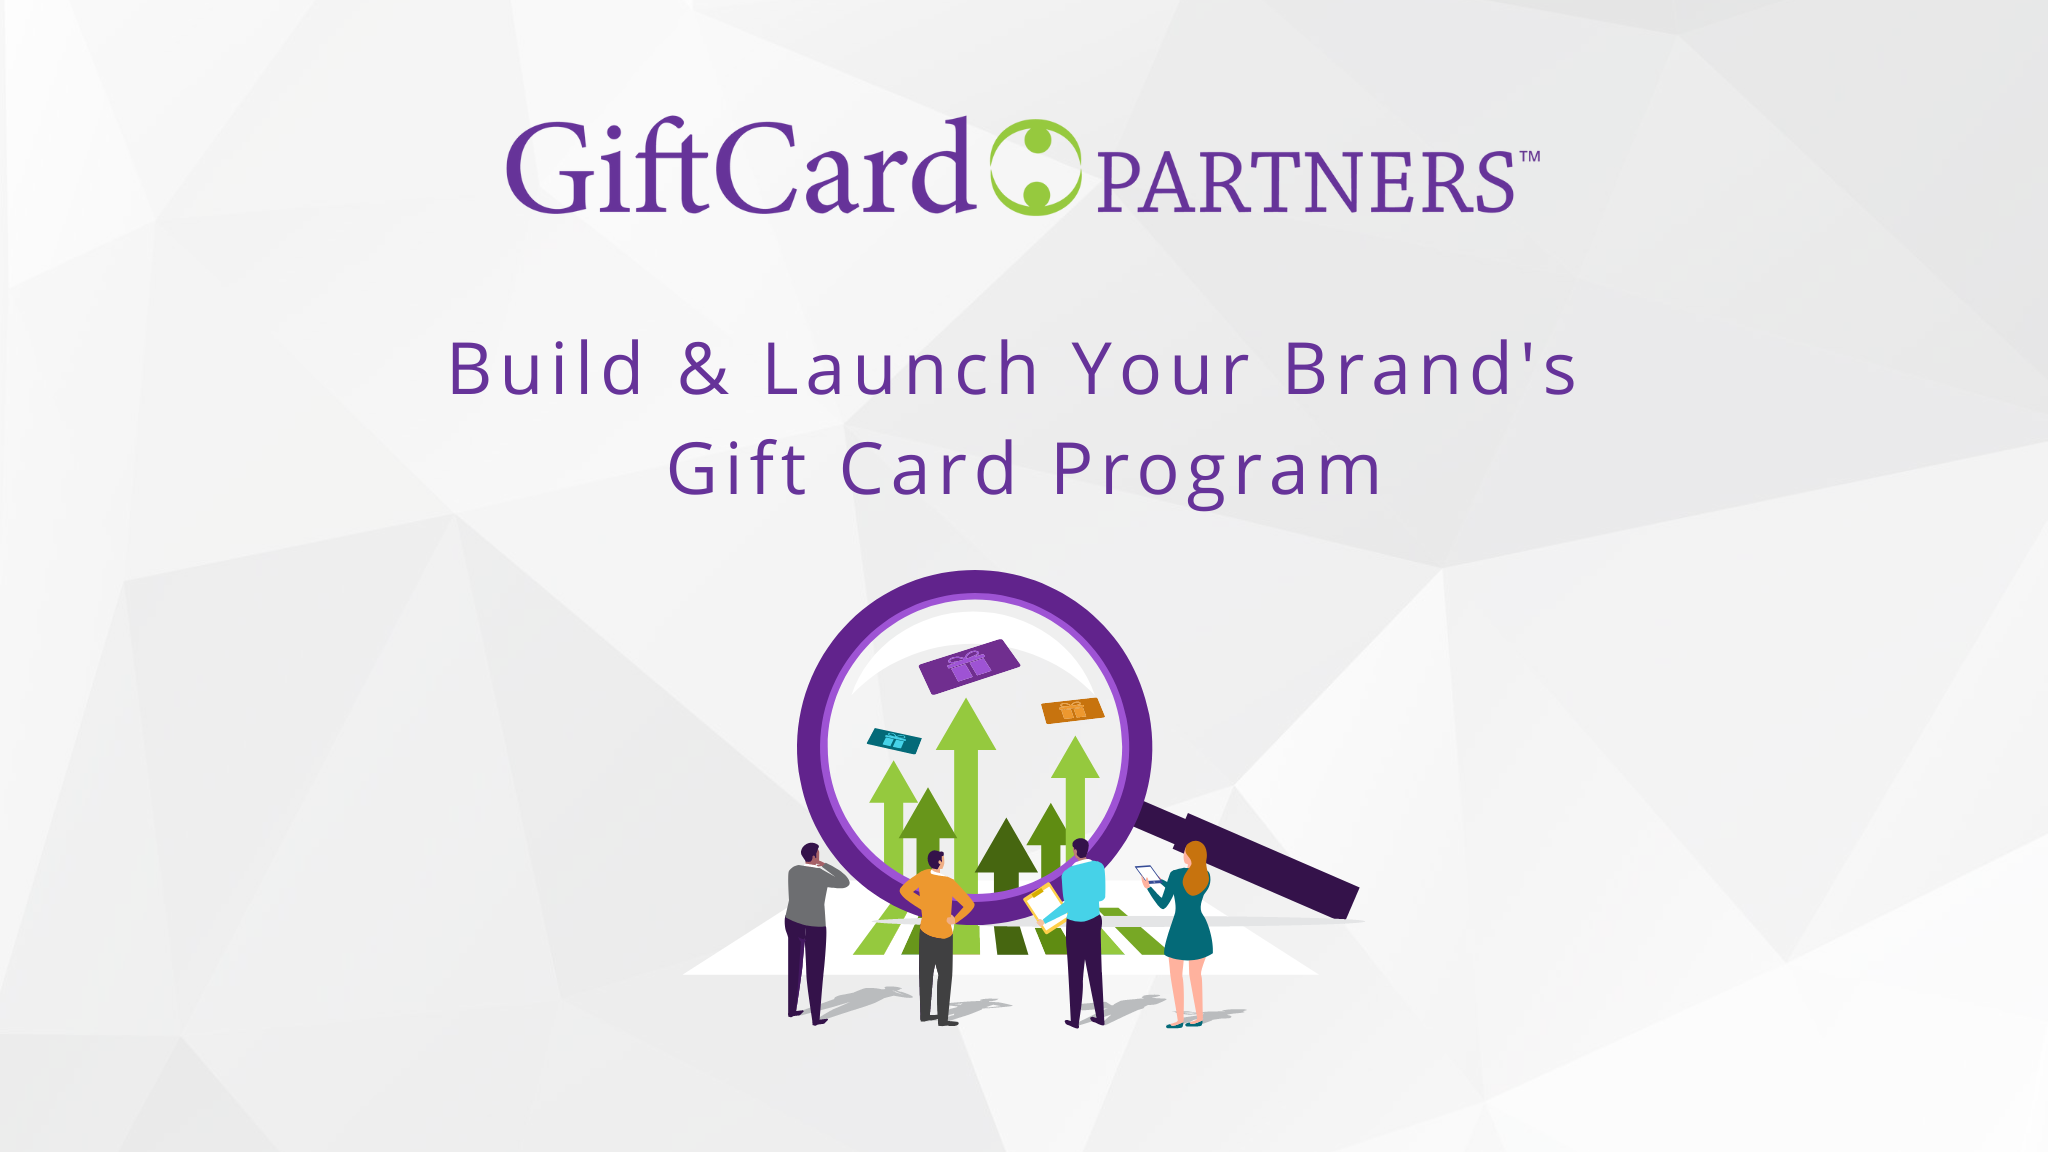 Build & Launch Your Gift Card Program with GiftCard Partners